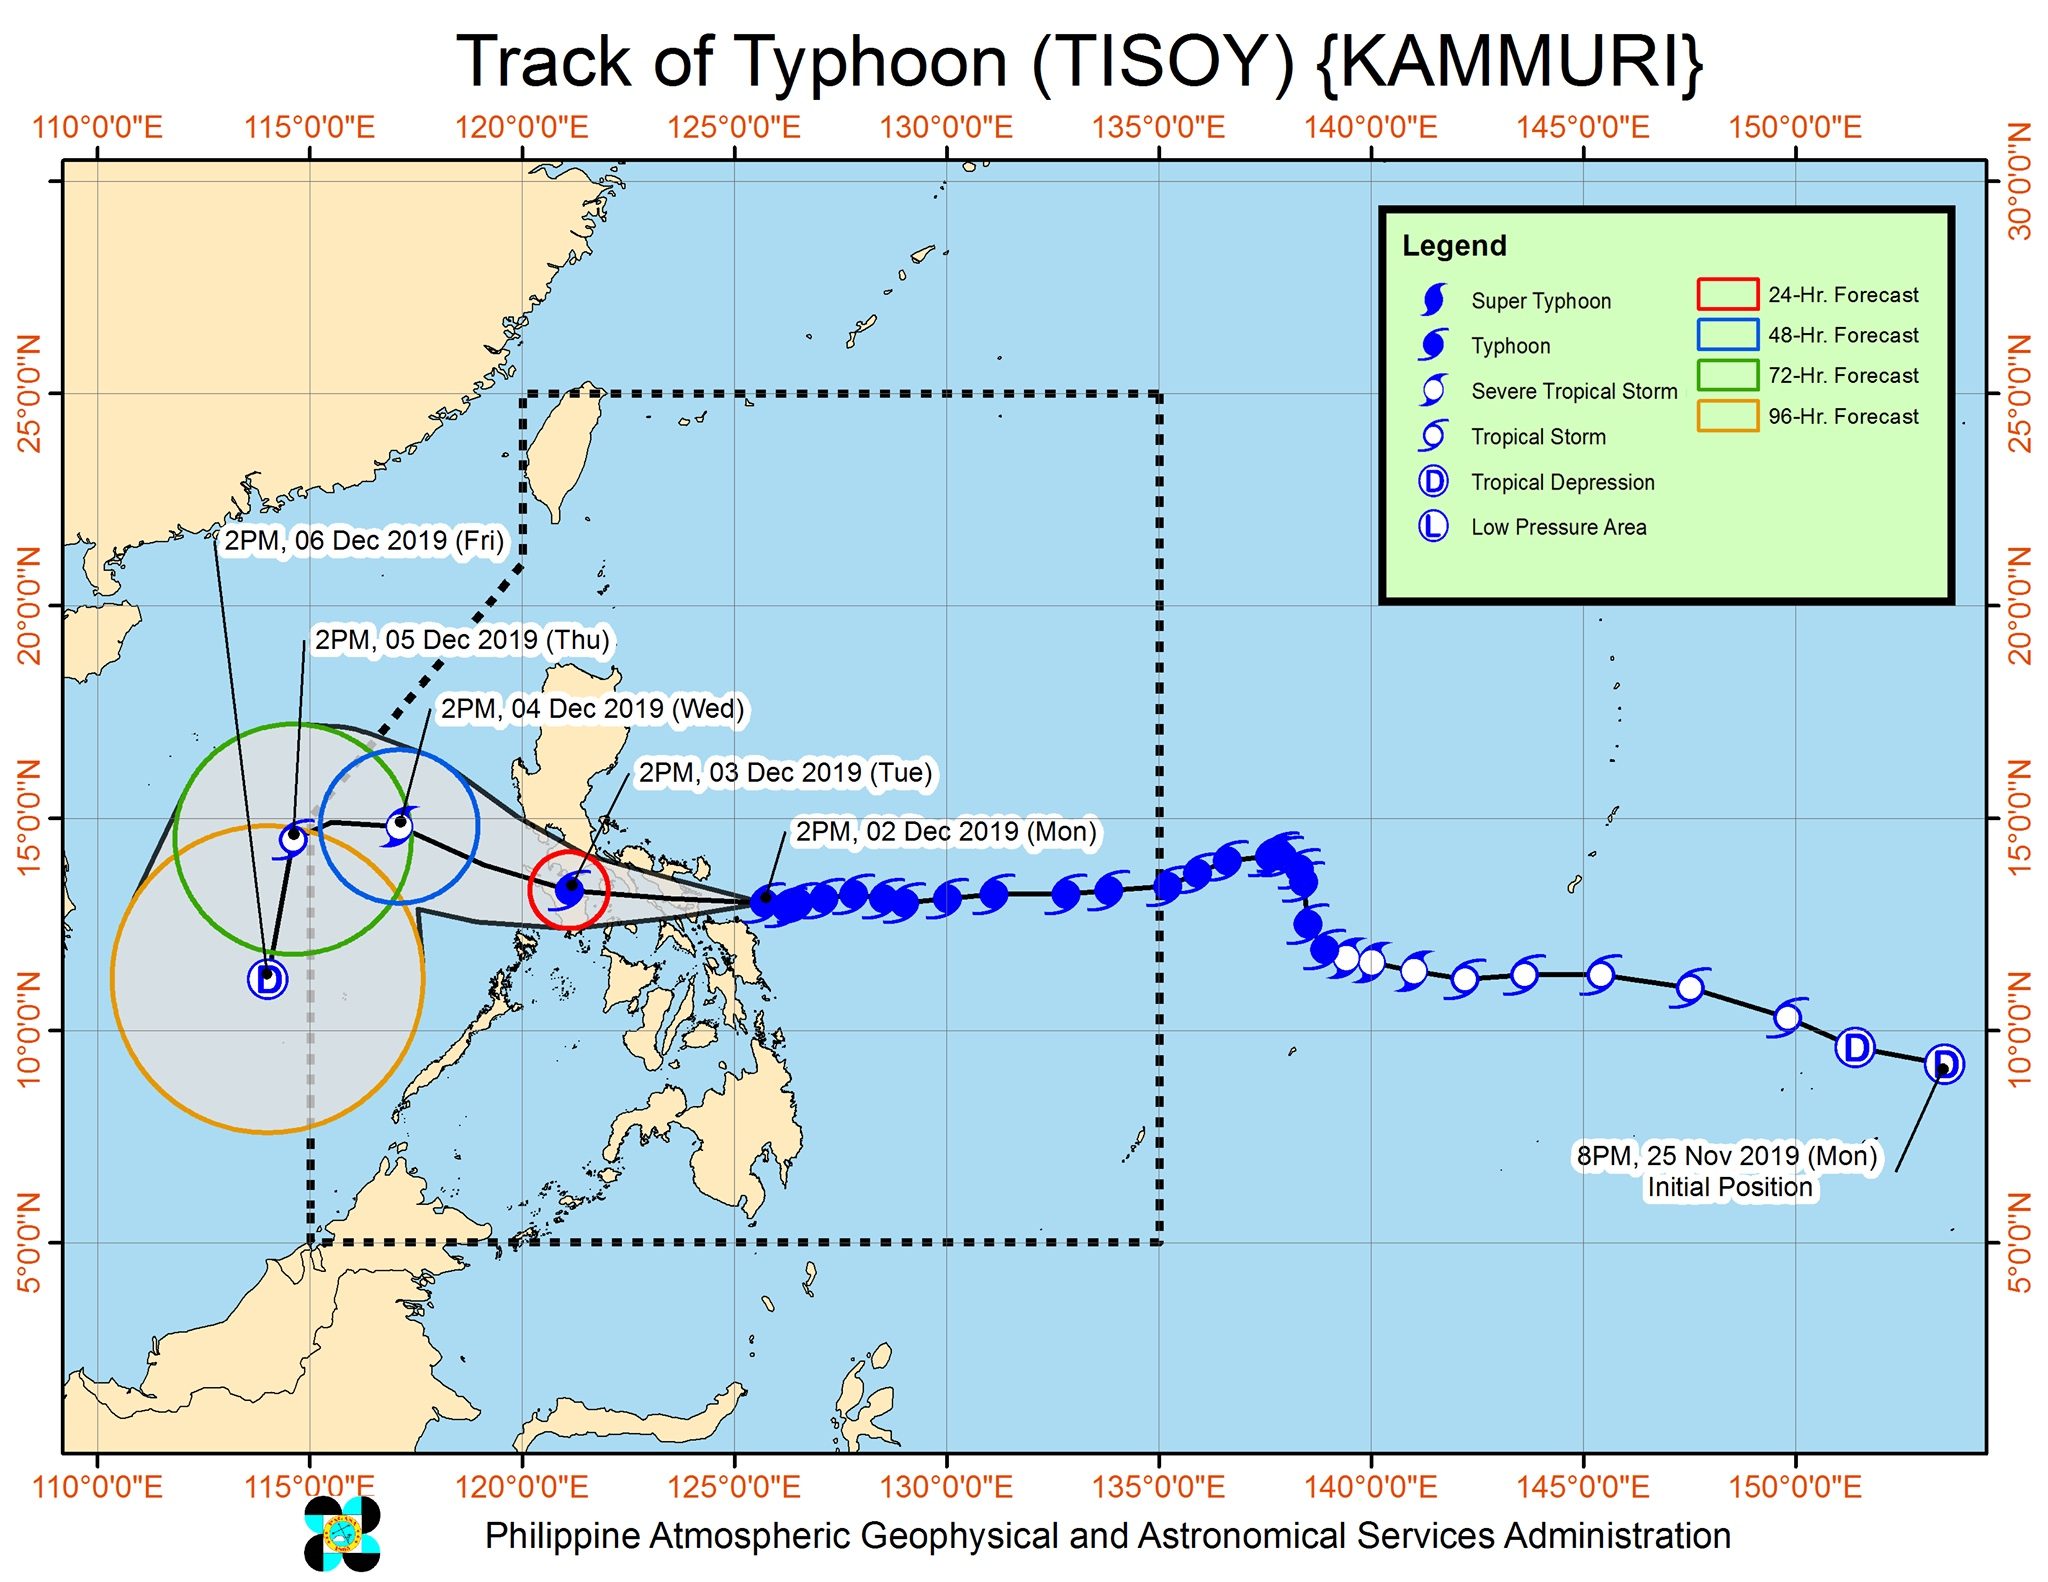 Forecast track of Typhoon Tisoy (Kammuri) as of December 2, 2019, 5 pm. Image from PAGASA 